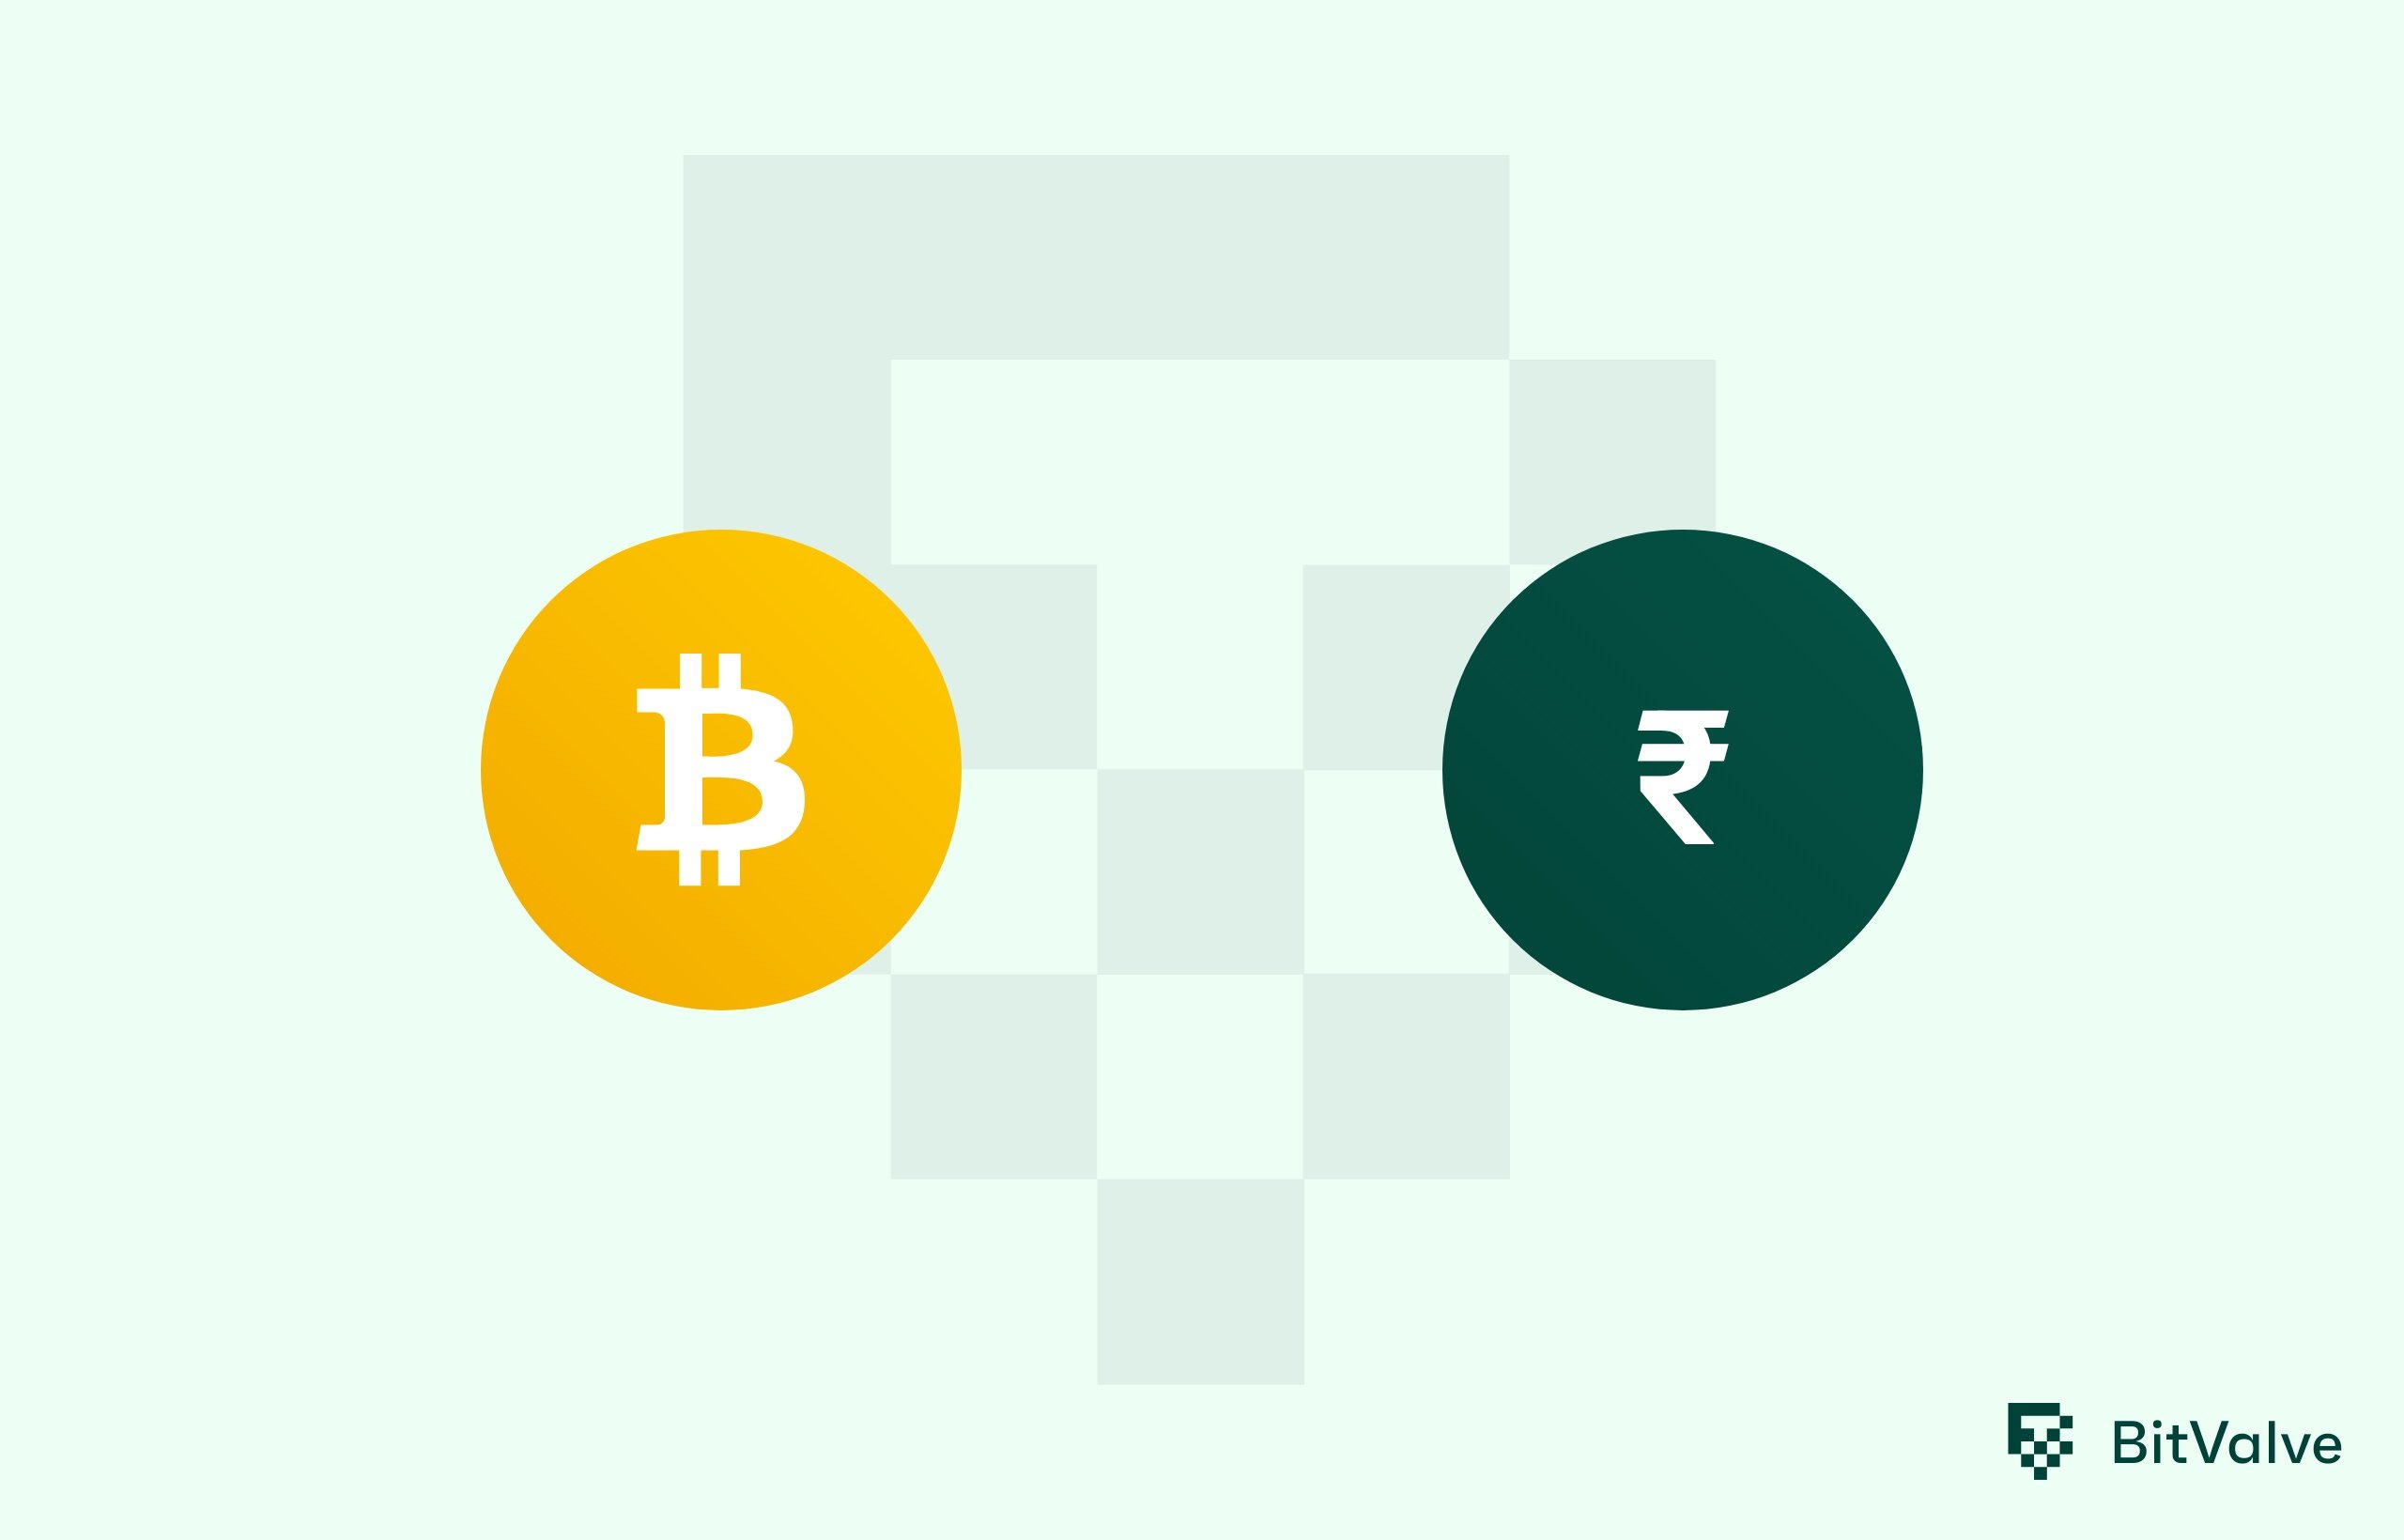 Buy Bitcoin, Cryptocurrency at India’s Largest Exchange | Trading Platform | WazirX